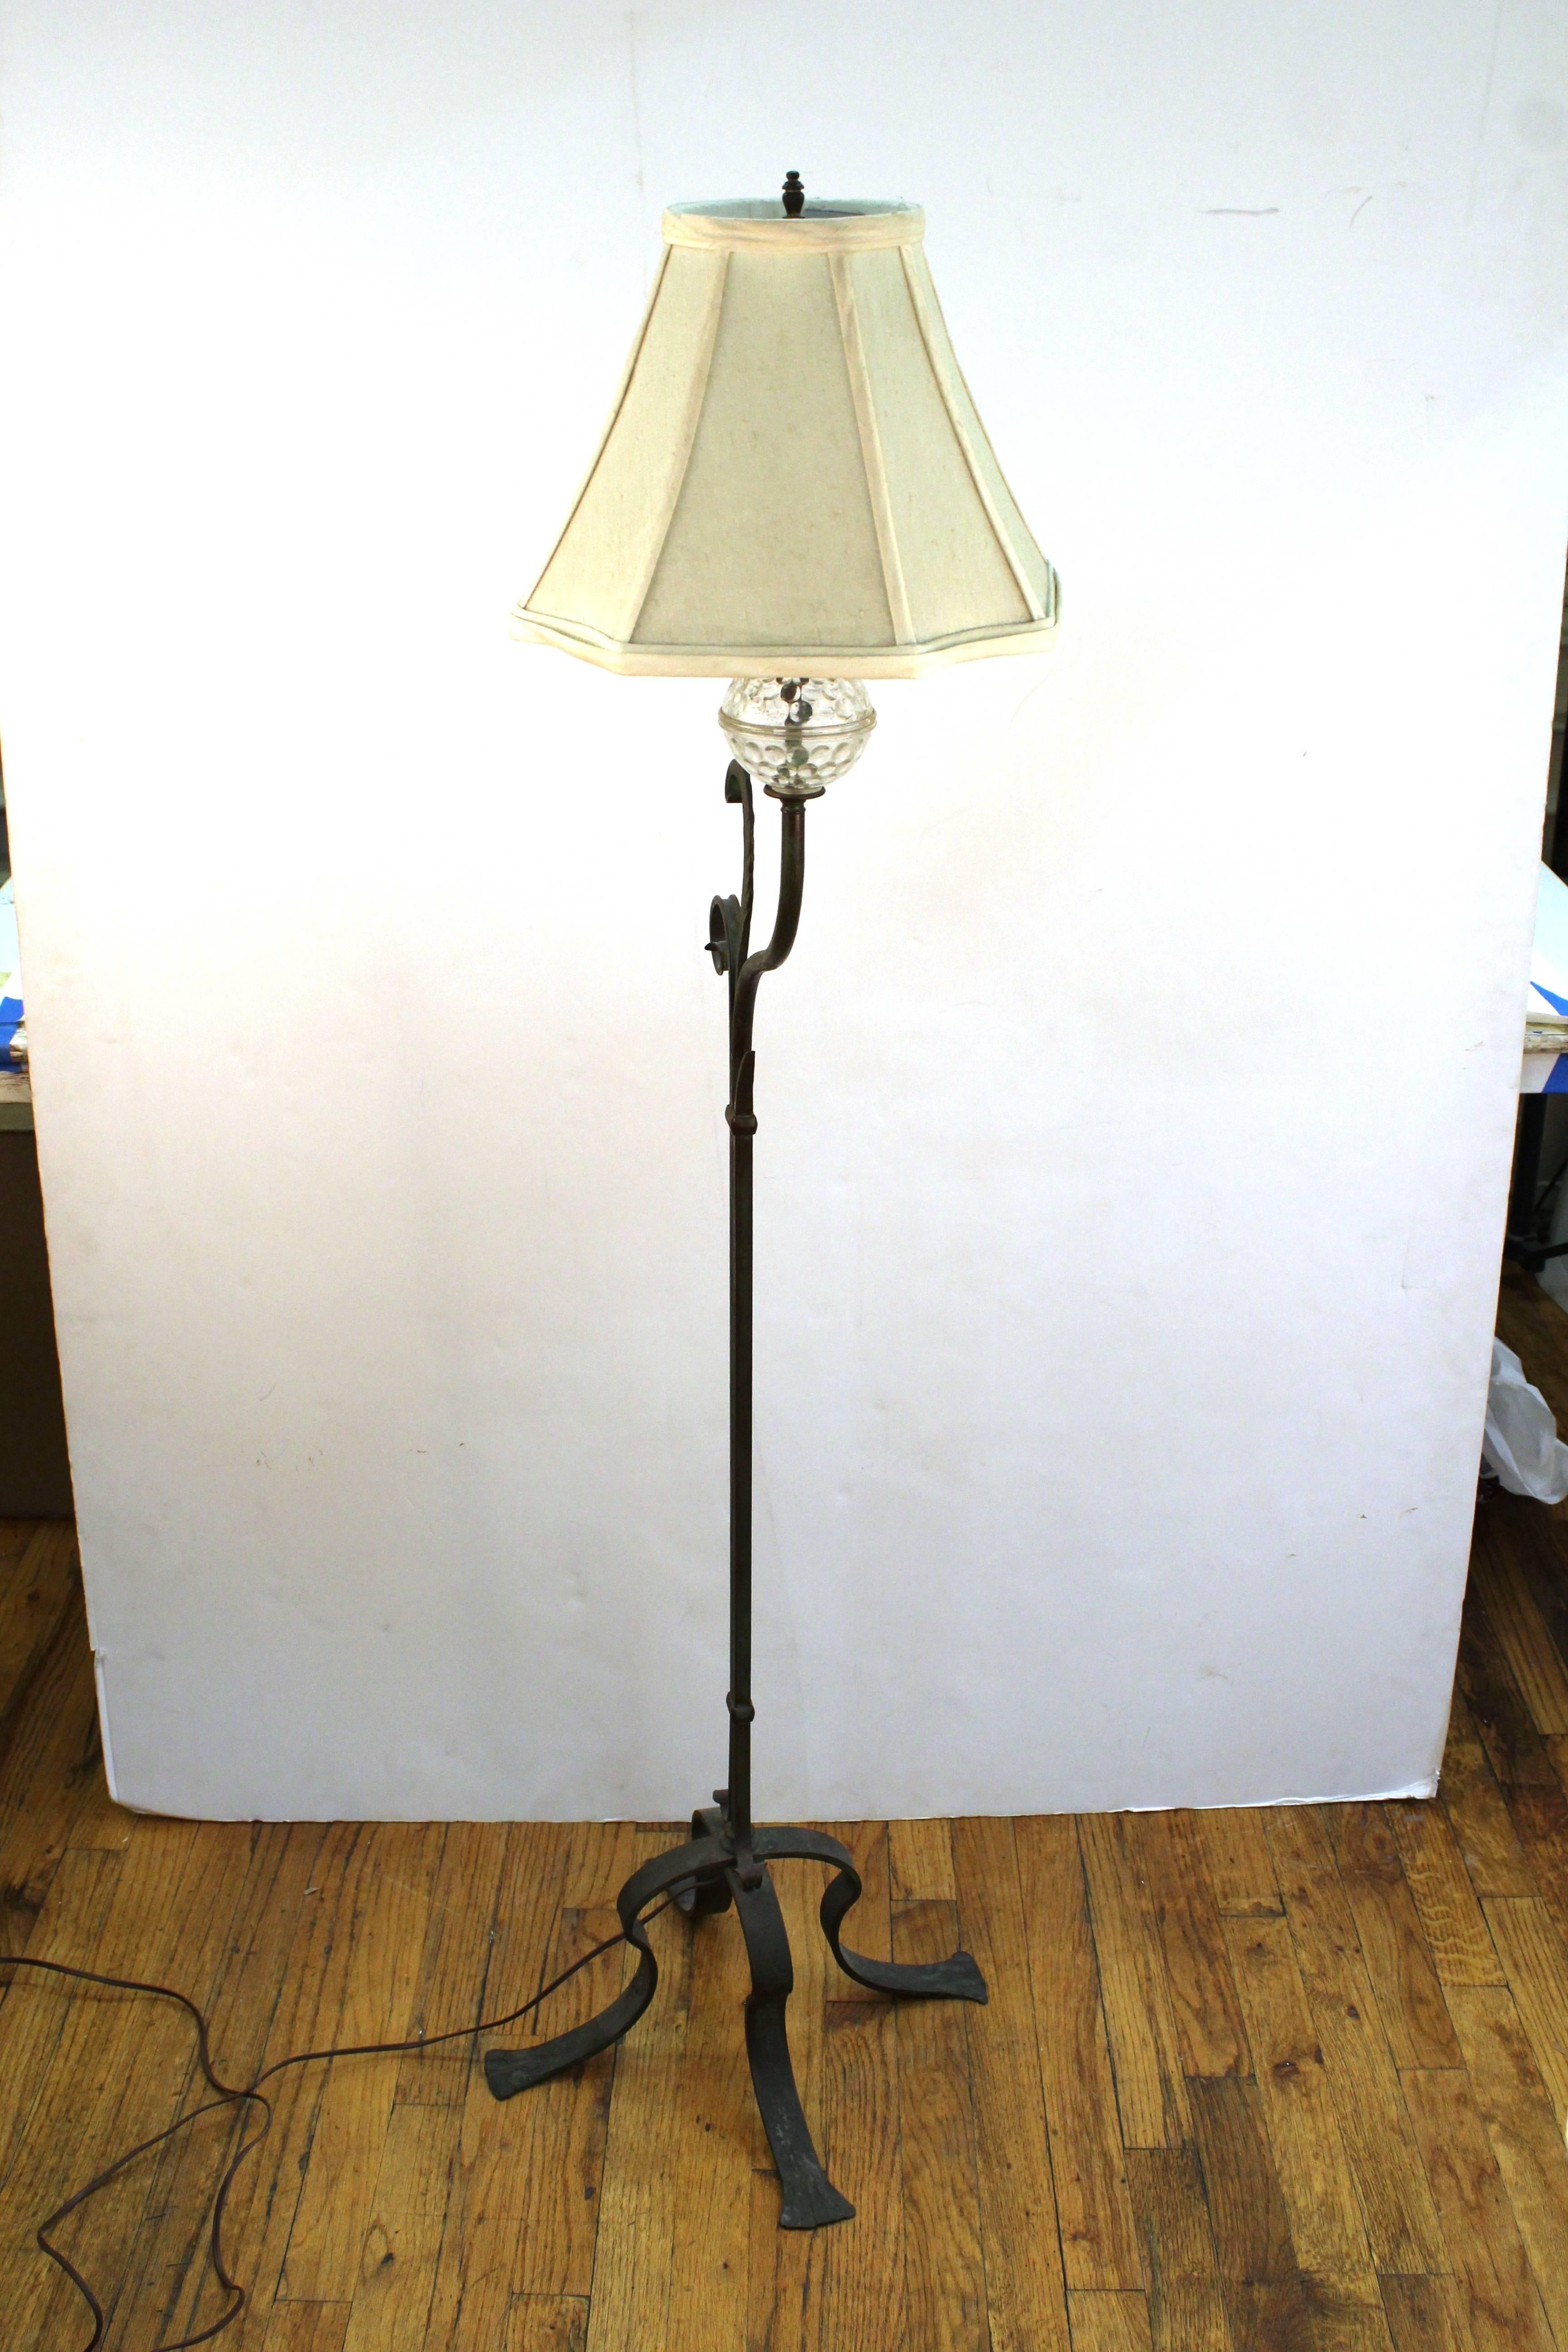 A wrought iron standing floor lamp with swag detailing and a cut-glass sphere. In good vintage condition.